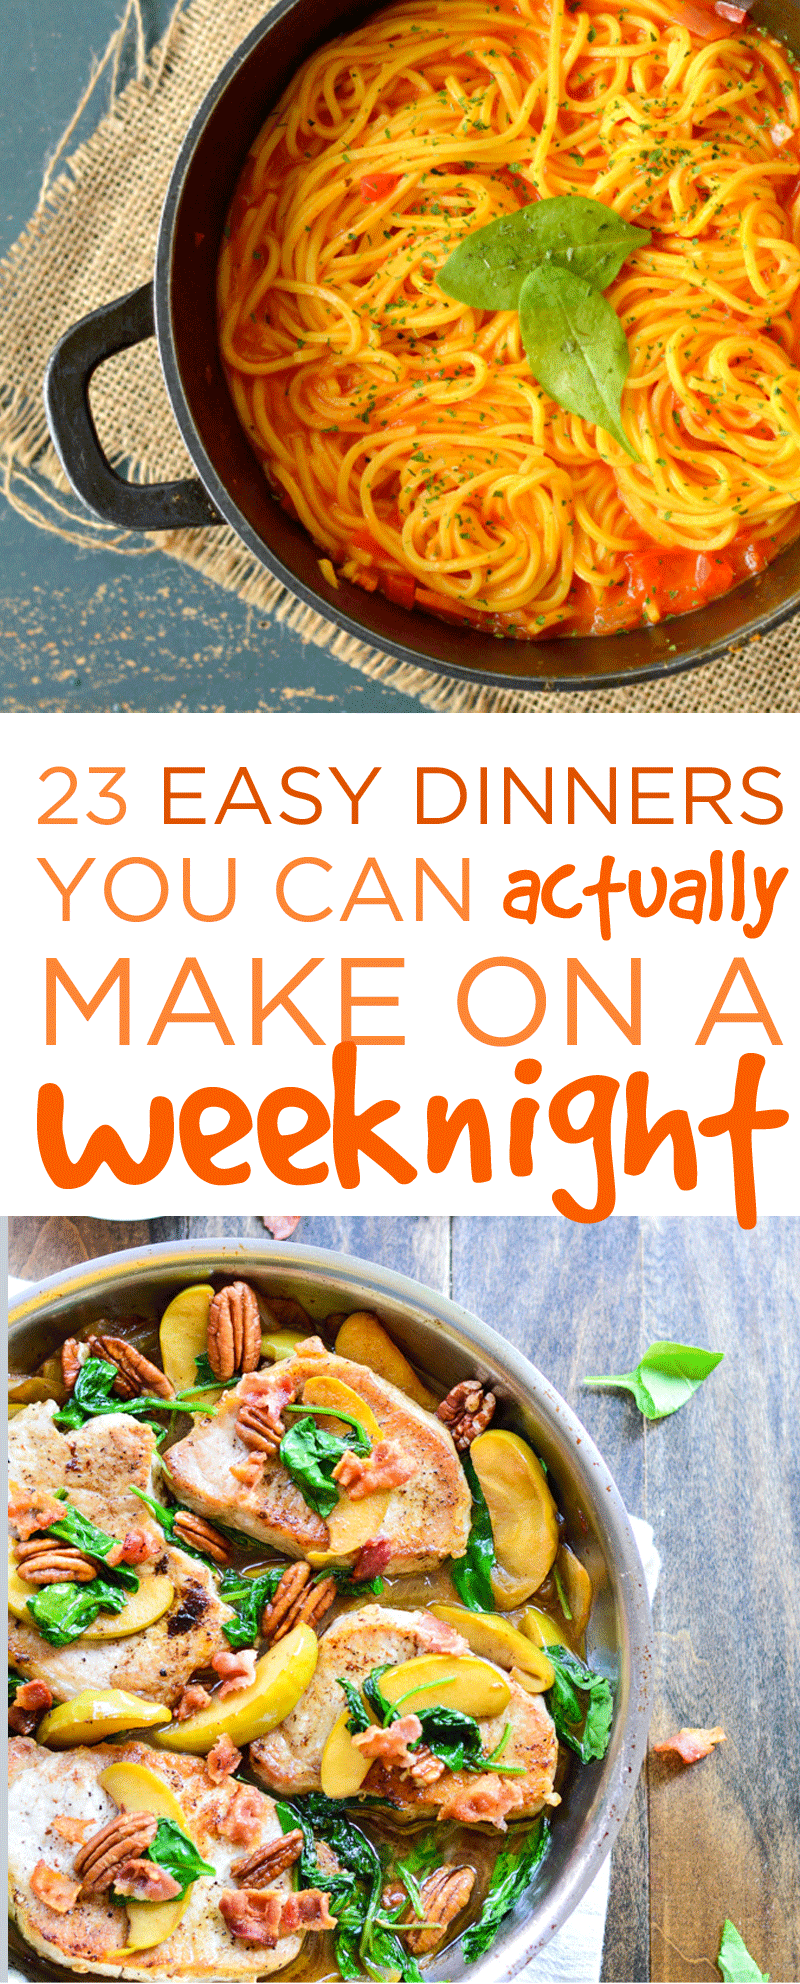 23 Easy Dinners You Can Actually Make On A Weeknight